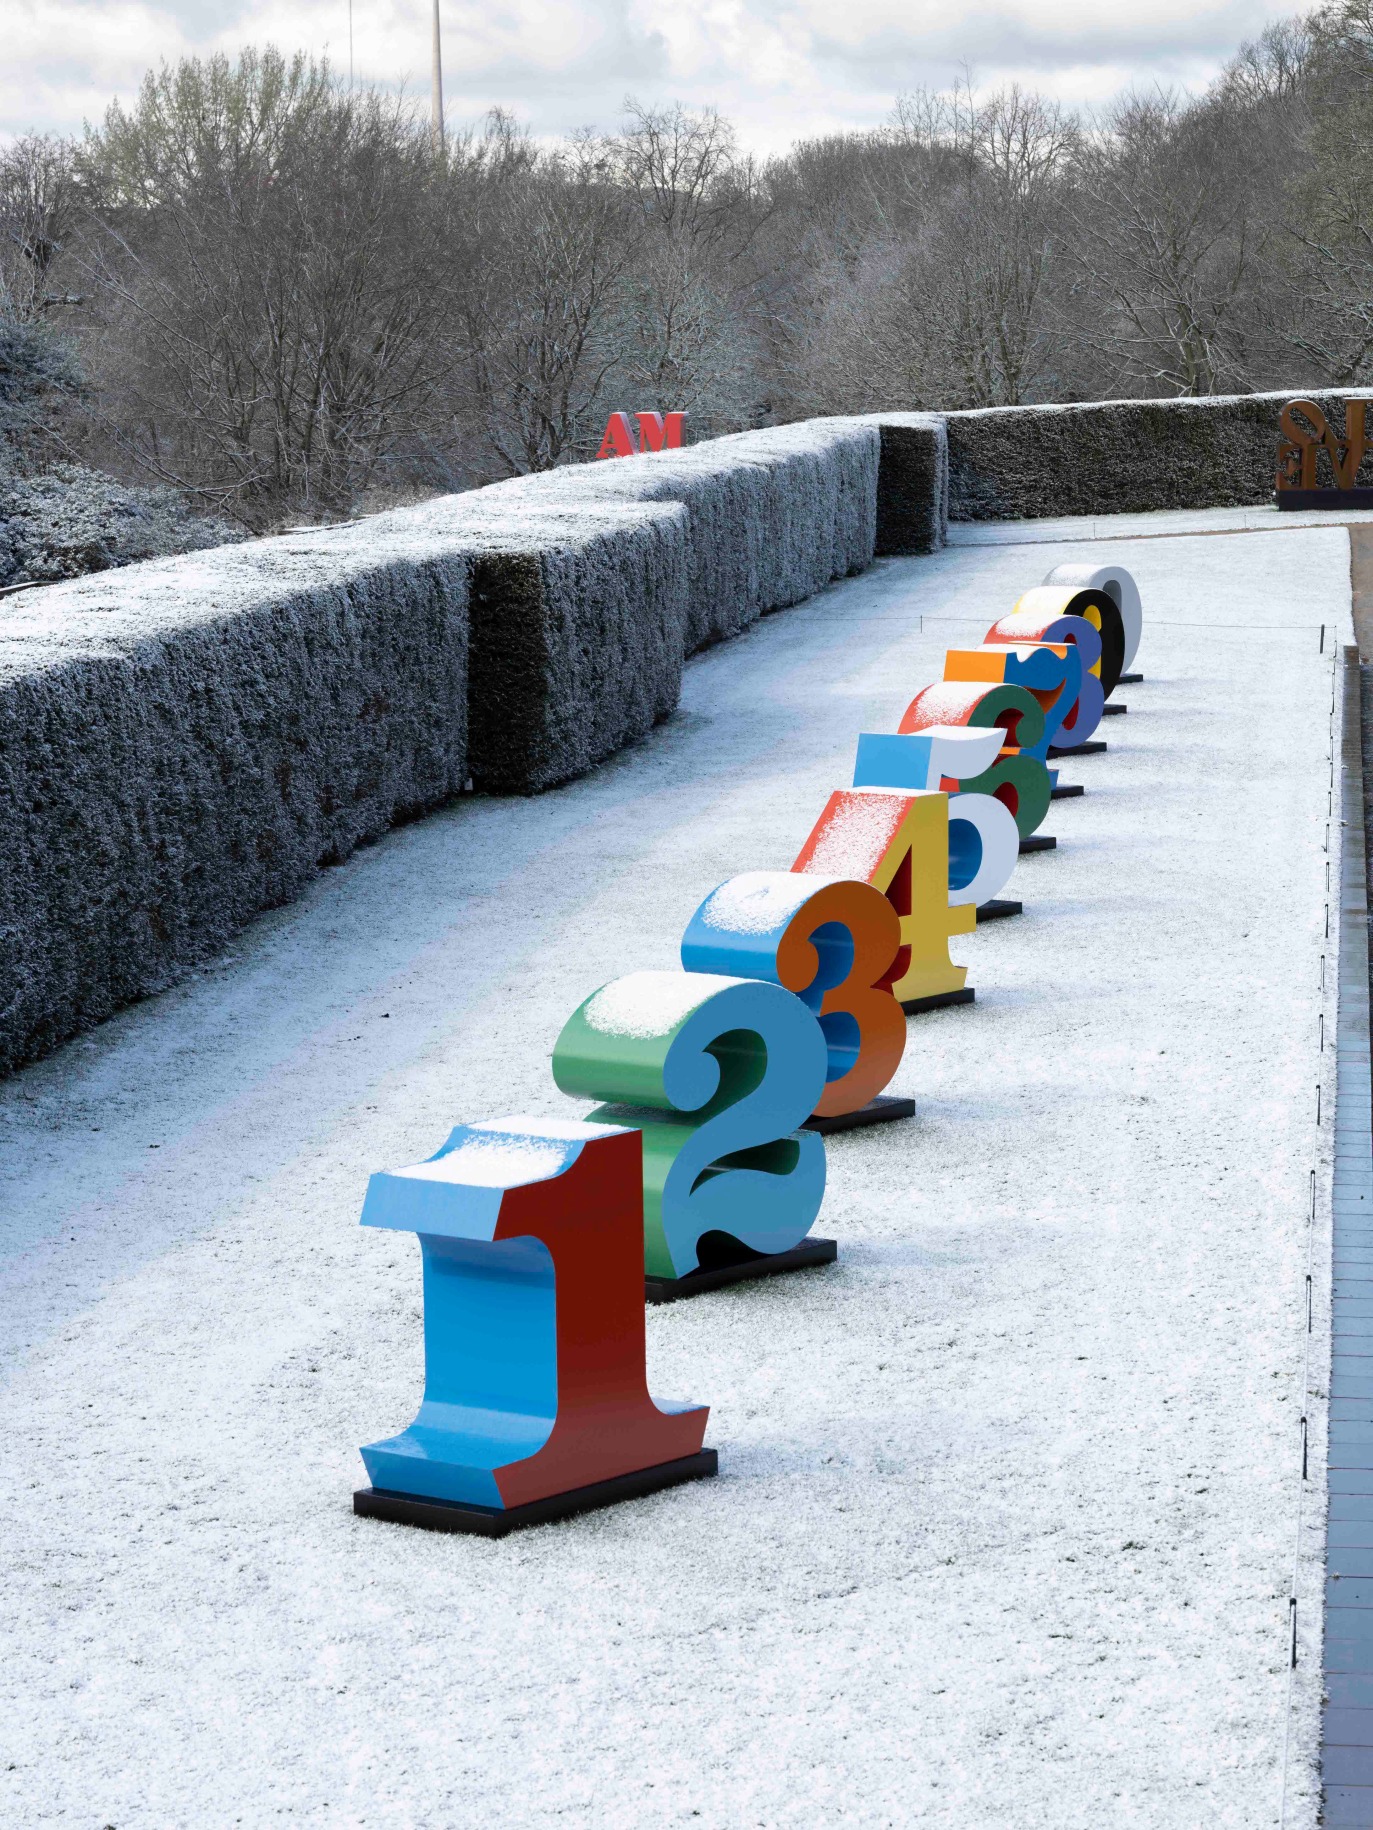 Installation view of Indiana&#039;s 6-foot ONE Through ZERO (The Ten Numbers)&nbsp;(1980&ndash;2001) in&nbsp;Robert Indiana: Sculpture 1958-2018, Yorkshire Sculpture Park, March 12, 2022&ndash;January 8, 2023, &nbsp;